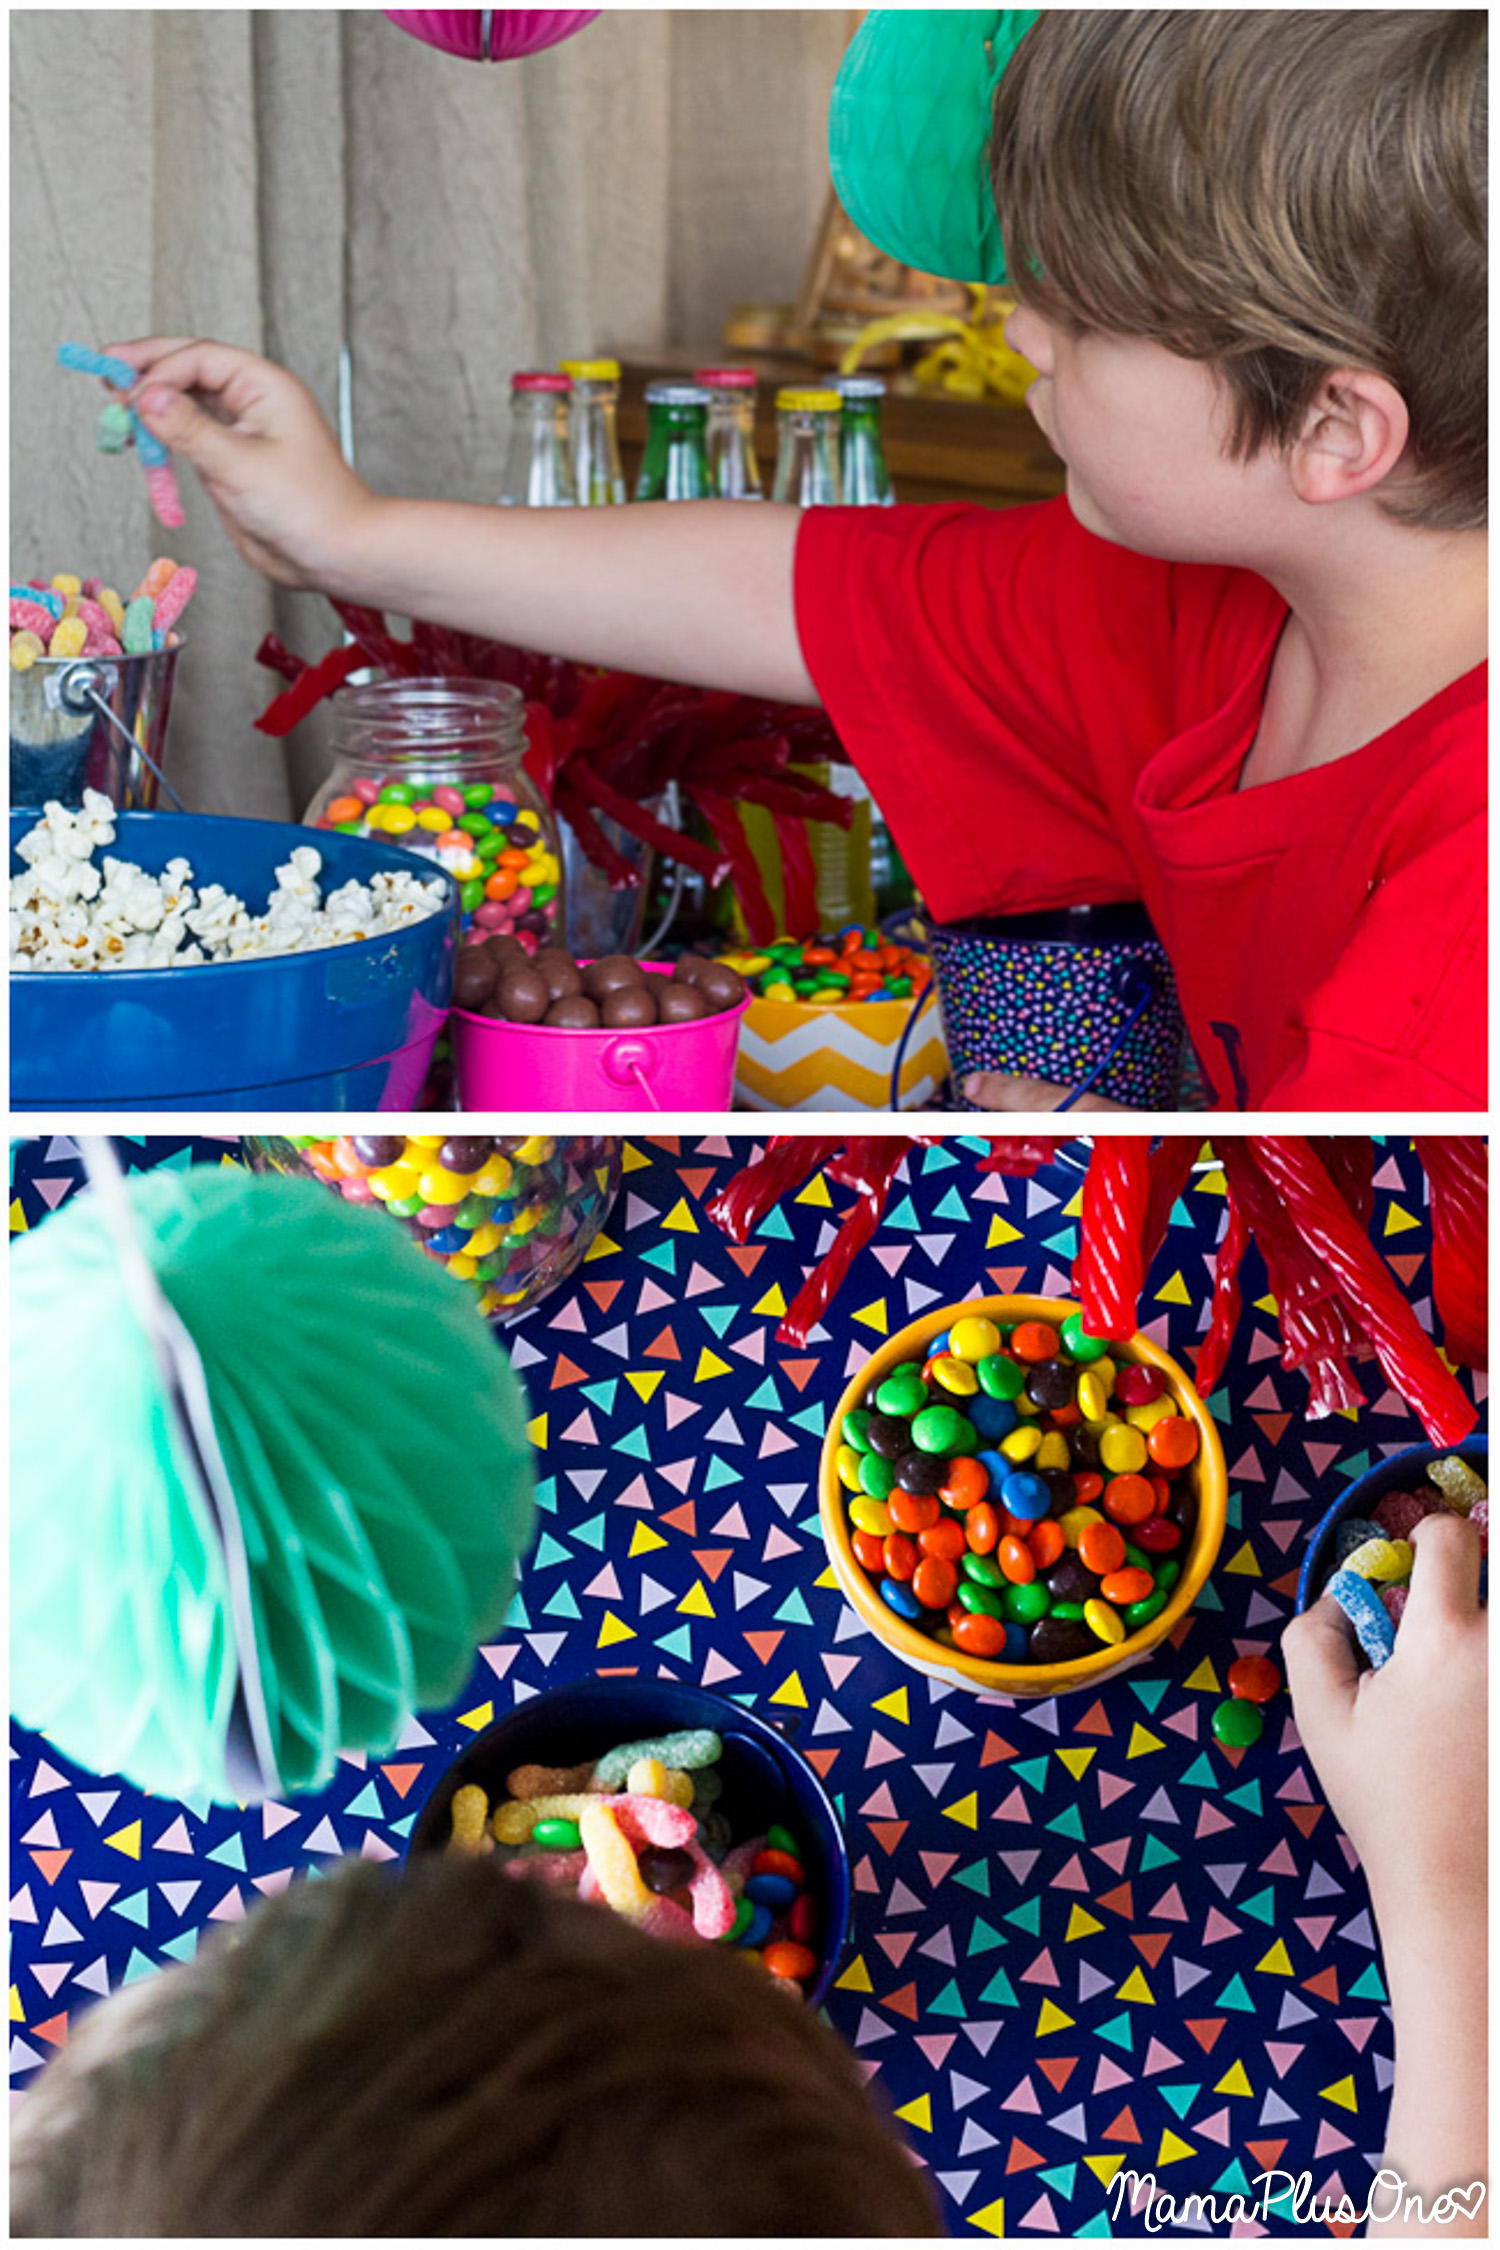 Family movie nights are a great way to bring the whole family together, but you can make them way more fun than just popping in a DVD, without a ton of extra money or time spent on your movie night. This is how we make family movie night AWESOME! (Our favorite tip? Letting everyone pick their own personal snack mix before the movie starts!) Plus, we share how YOU can get a free VUDU credit every month with your Walmart Family Mobile account. #YourTaxCash [ad]